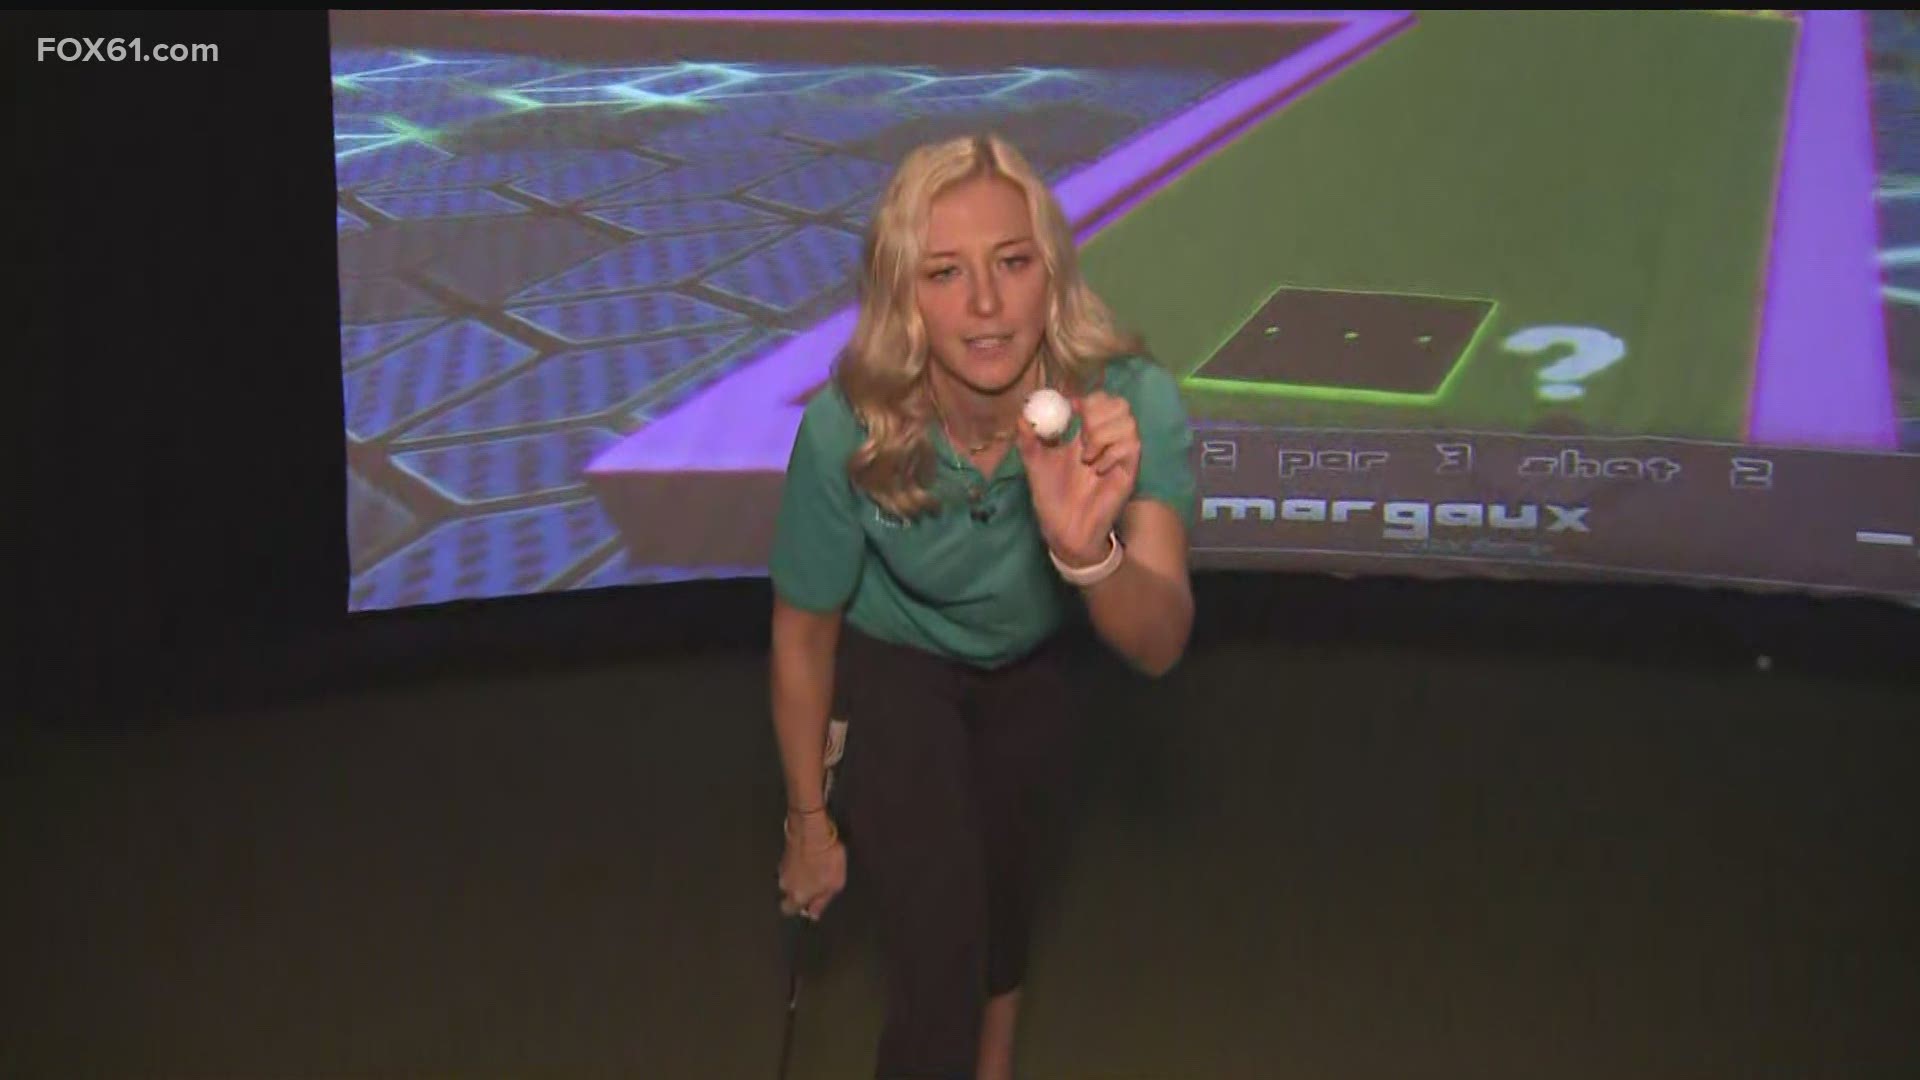 FOX61's Margaux Farrell hit the virtual links this morning at Oakwood Virtual Golf in Glastonbury.